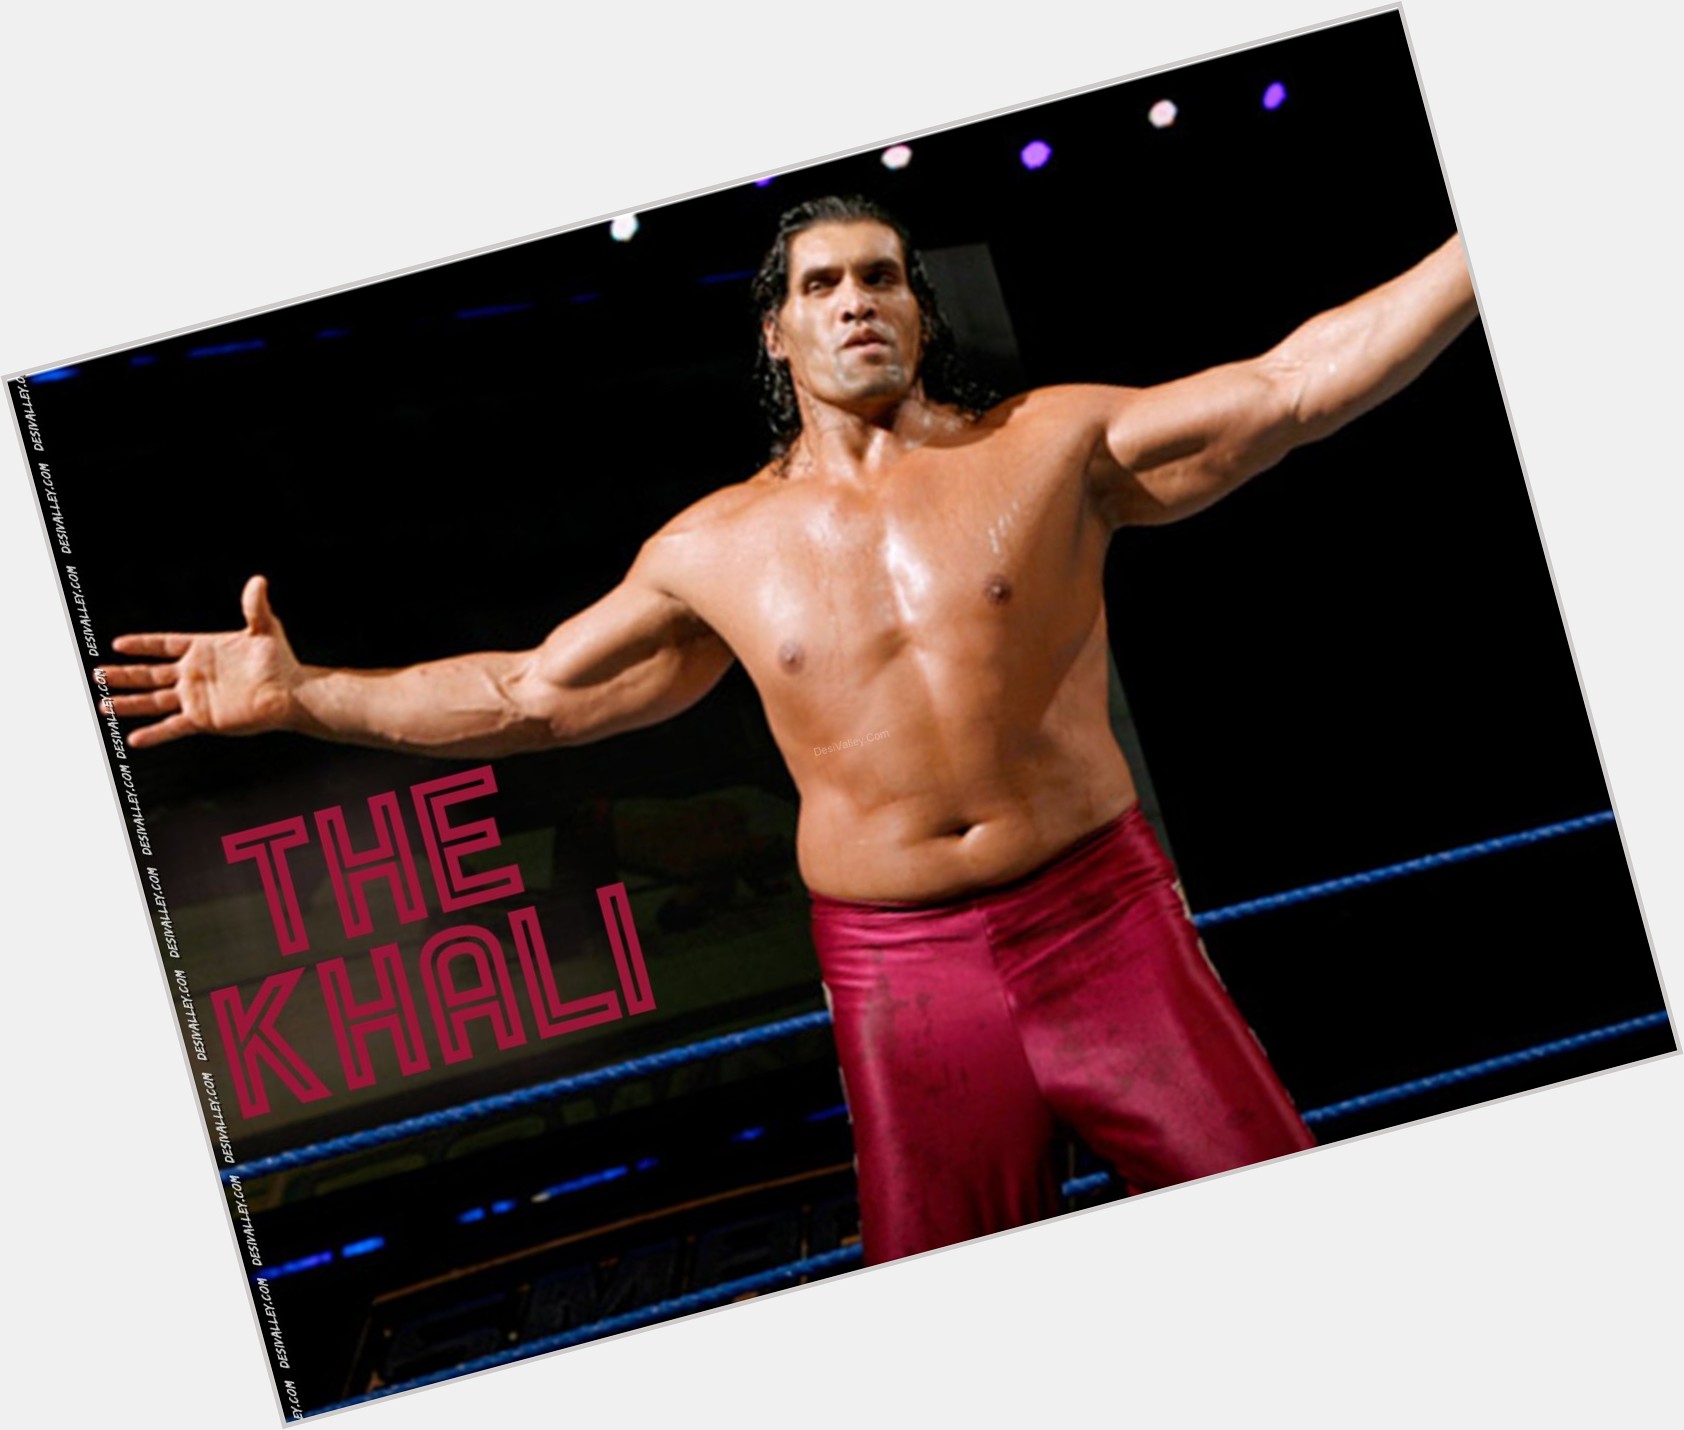 The Great Khali dating 2